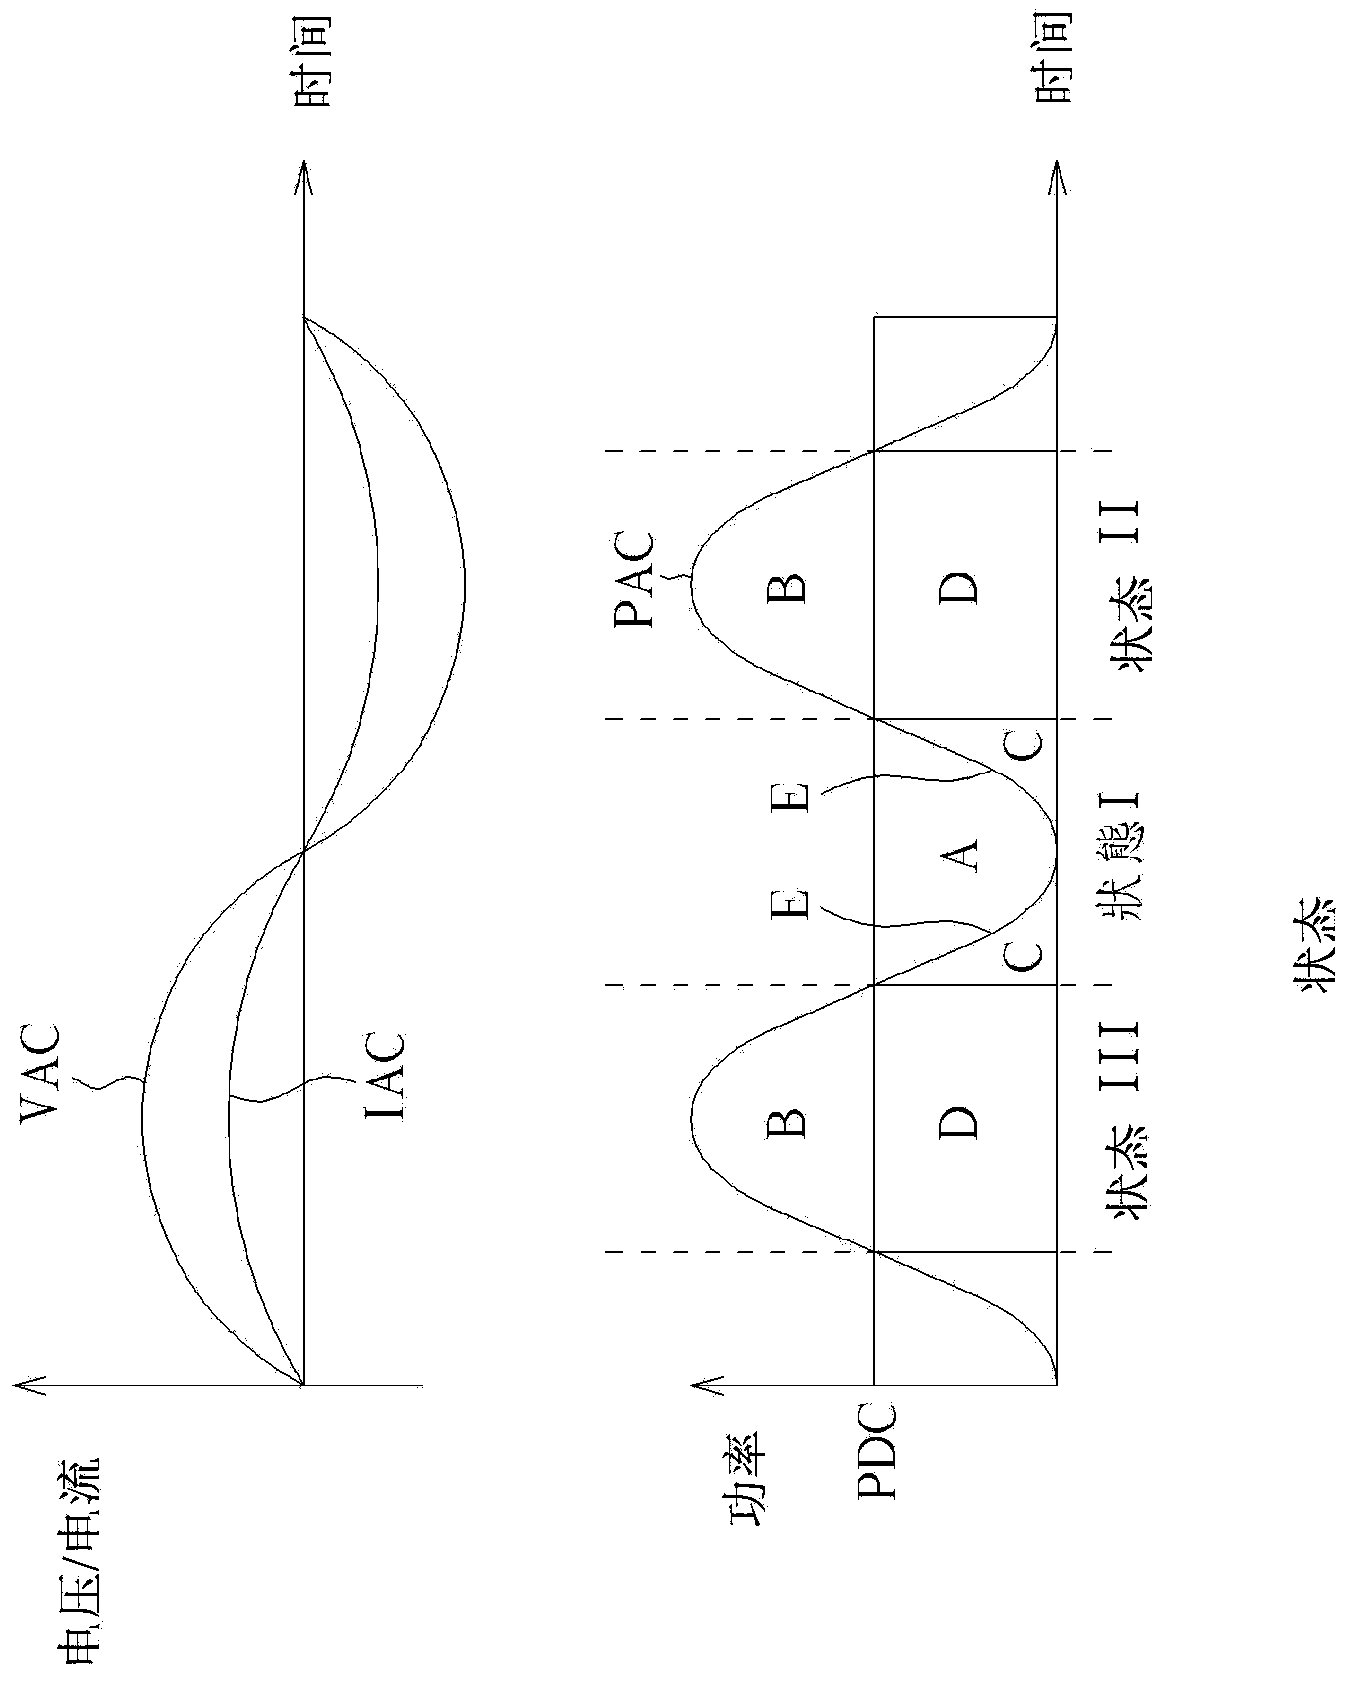 Three-port single-phase single-pole micro current converter and operating method thereof